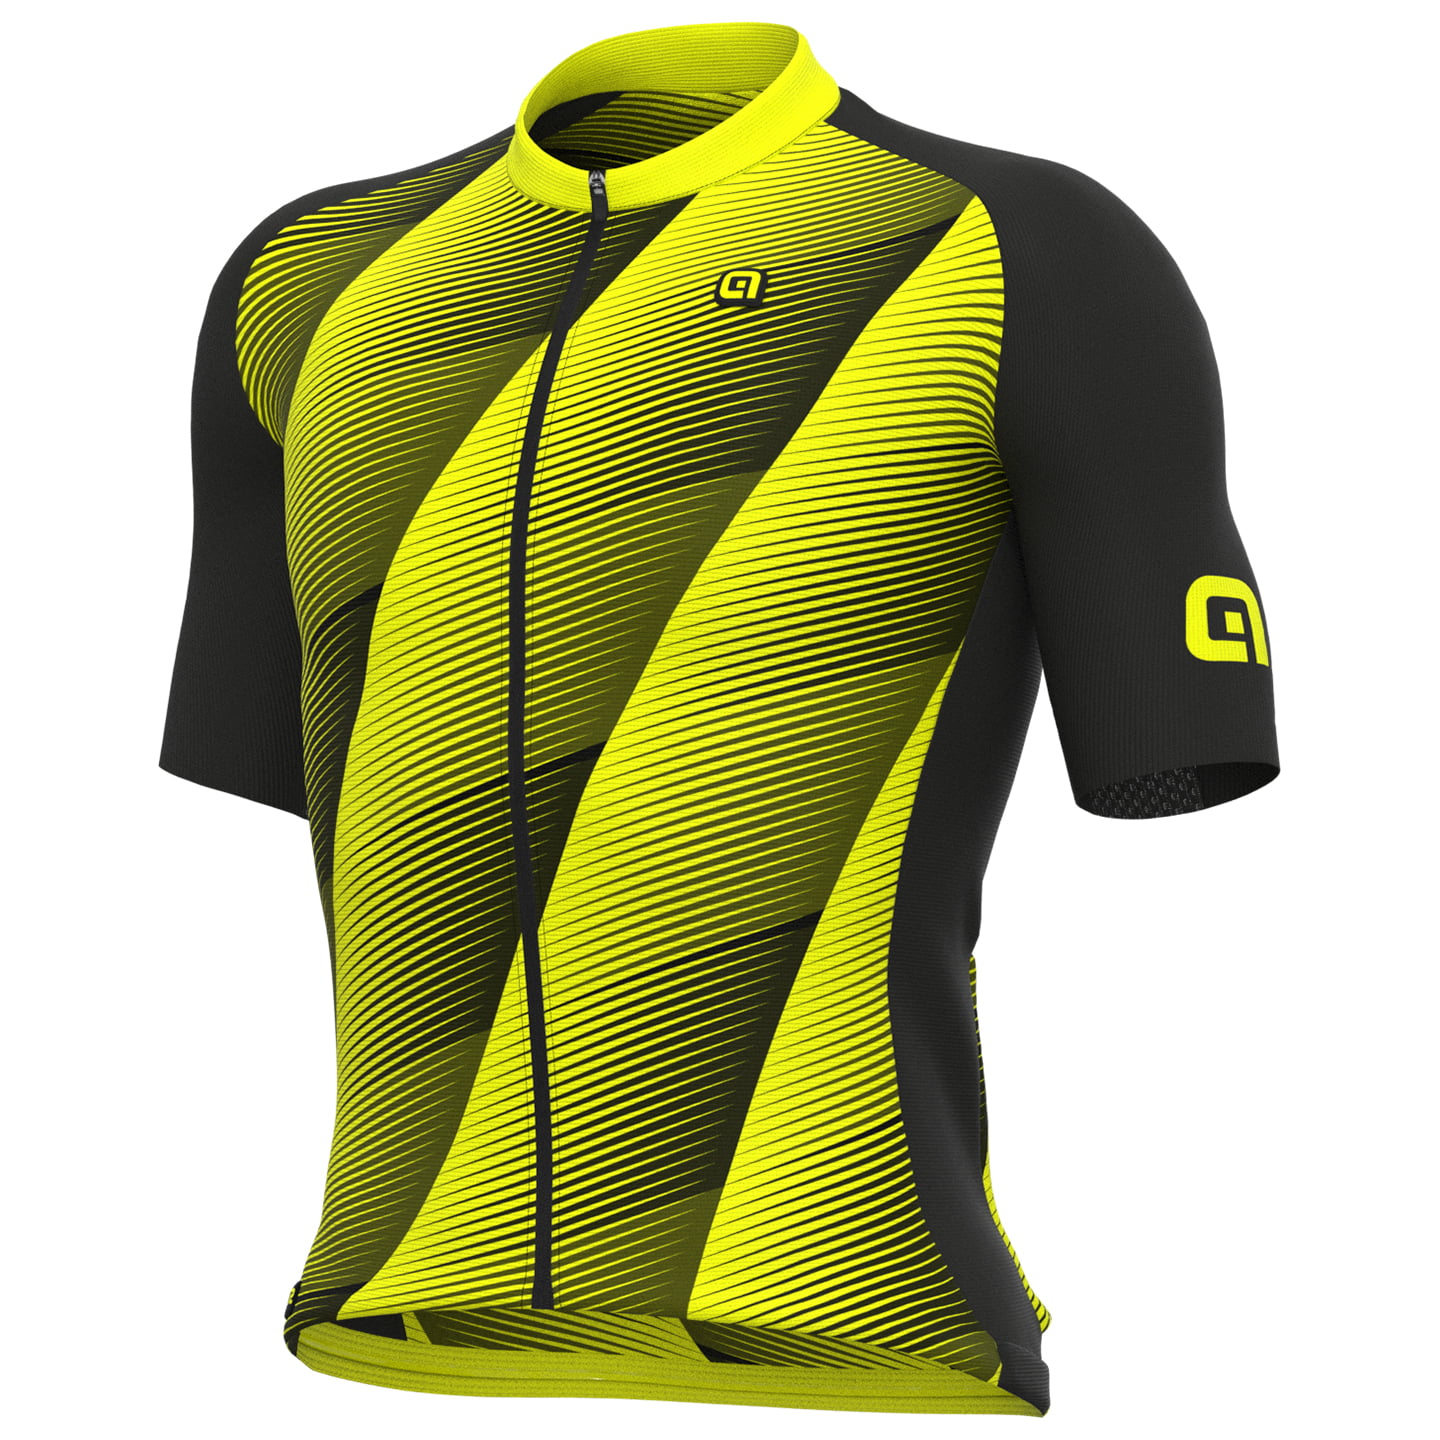 ALE Square Short Sleeve Jersey Short Sleeve Jersey, for men, size S, Cycling jersey, Cycling clothing